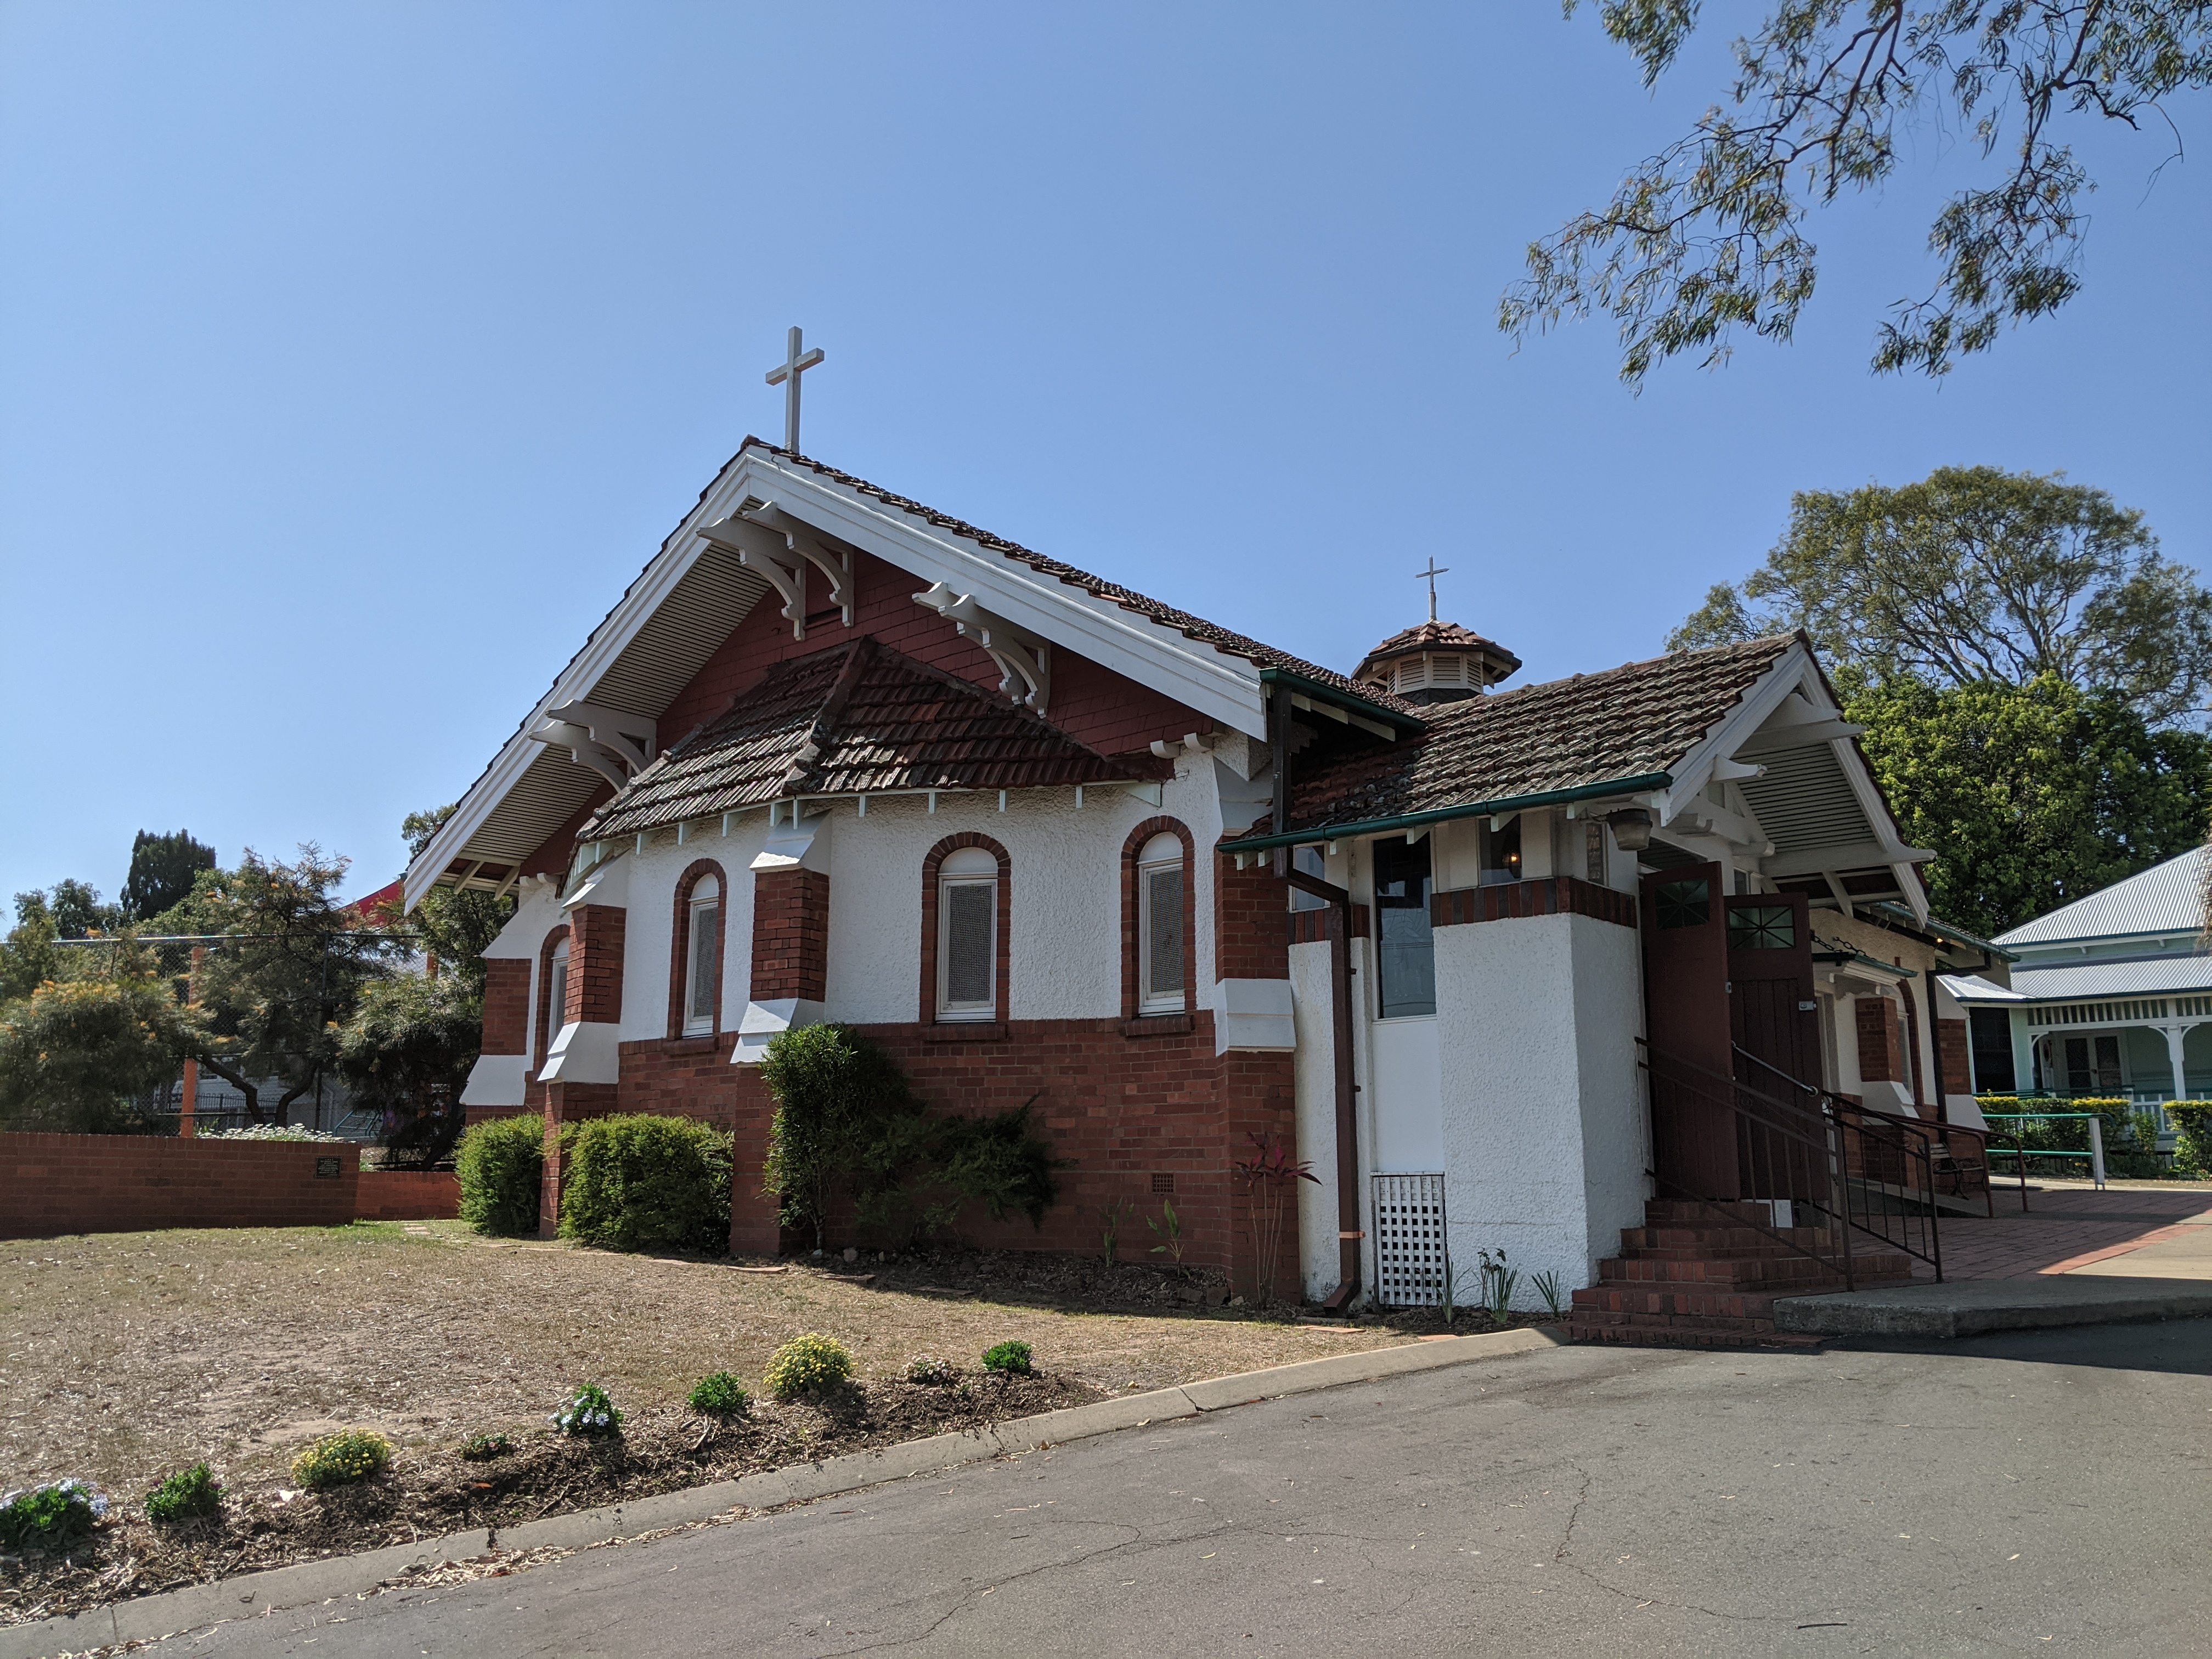 This is an image of the local heritage place known as St Margaret's Anglican Church